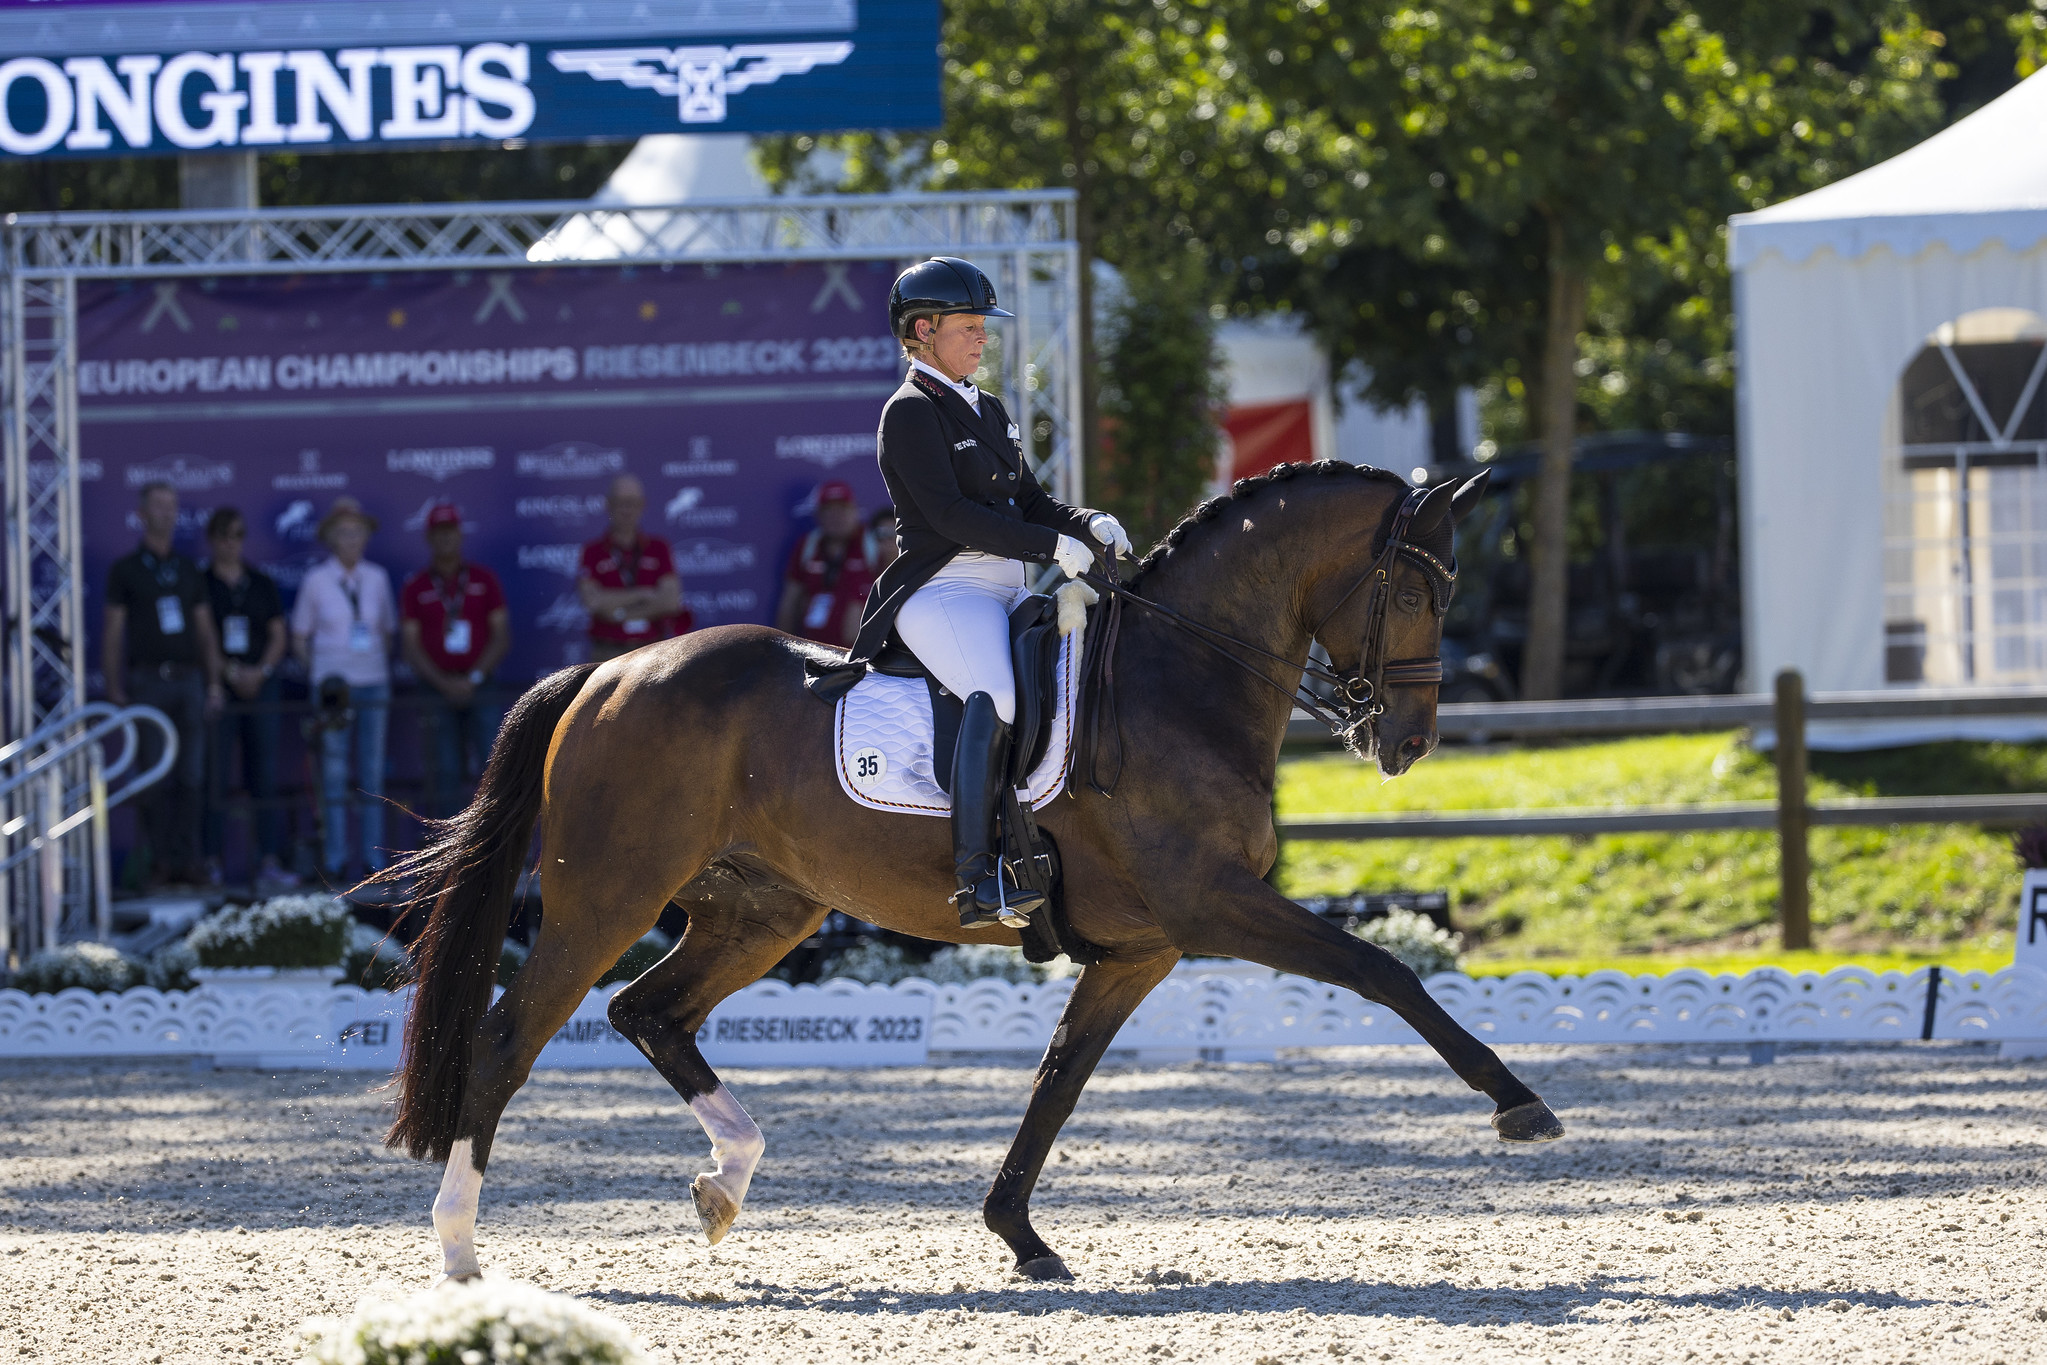 Isabell Werth (GER) and DSP Quantaz (Photo: ©FEI/Leanjo de Koster)